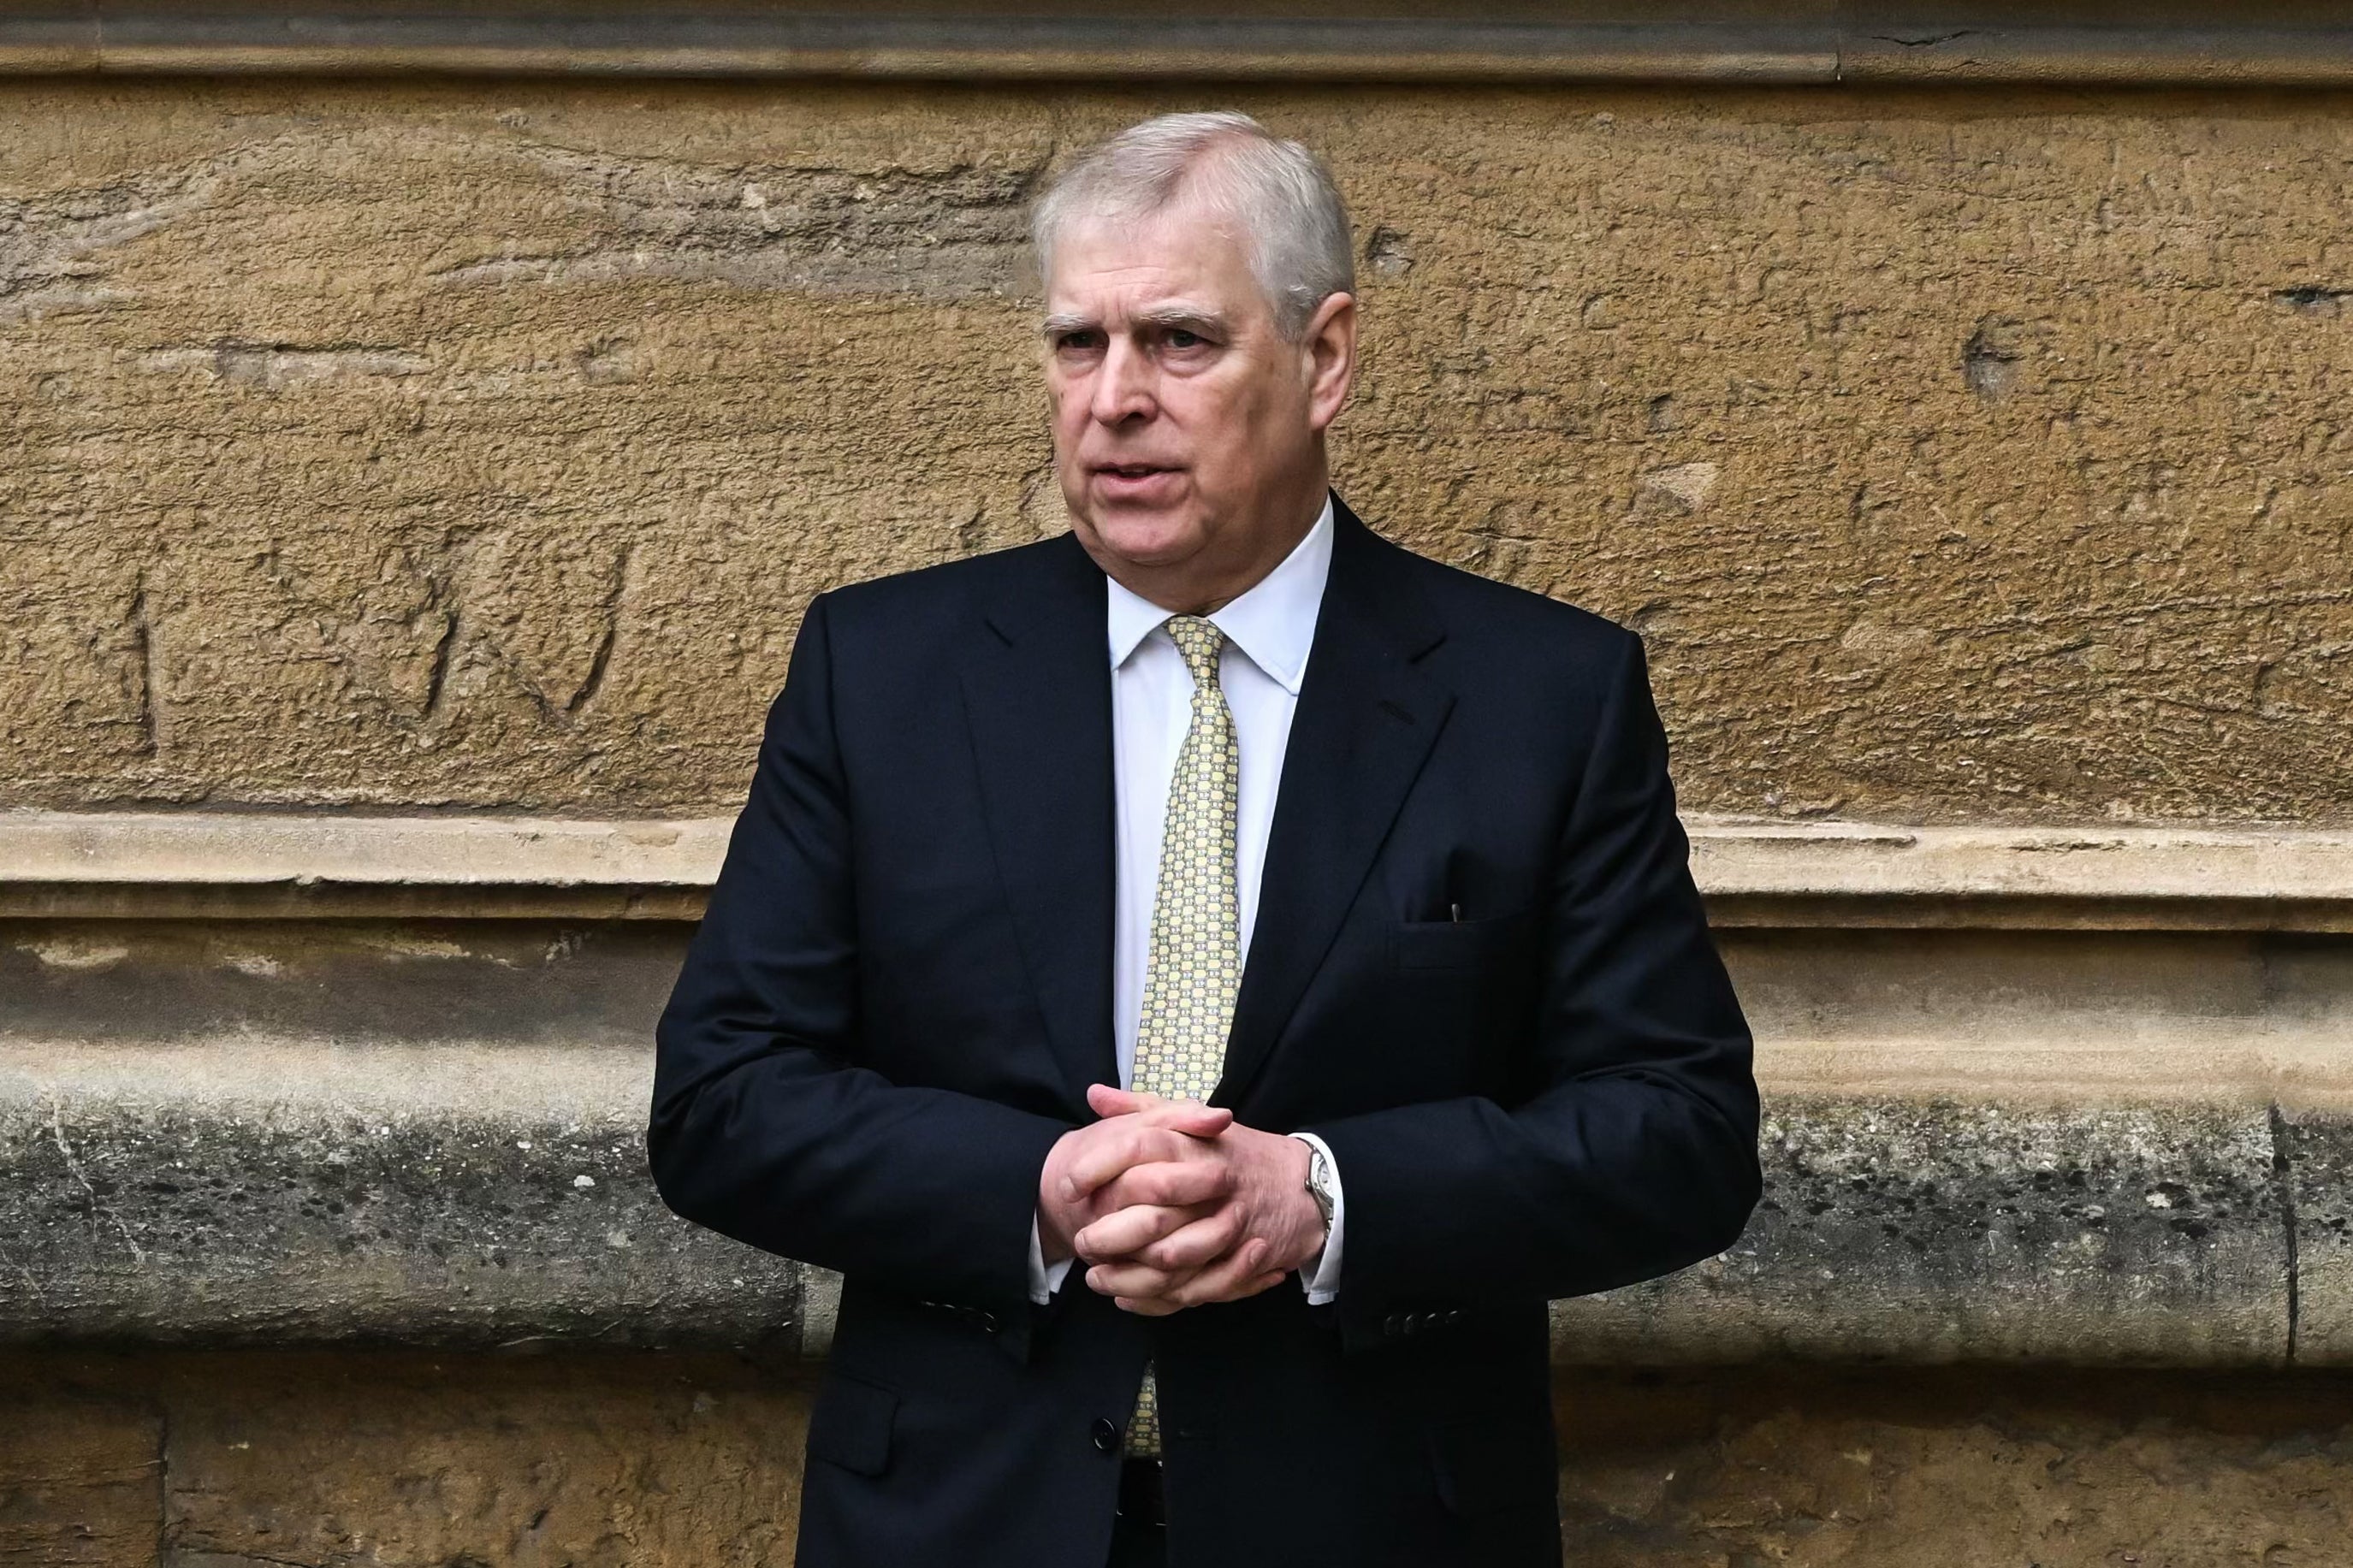 Prince Andrew was disgraced following his association with Jeffrey Epstein.